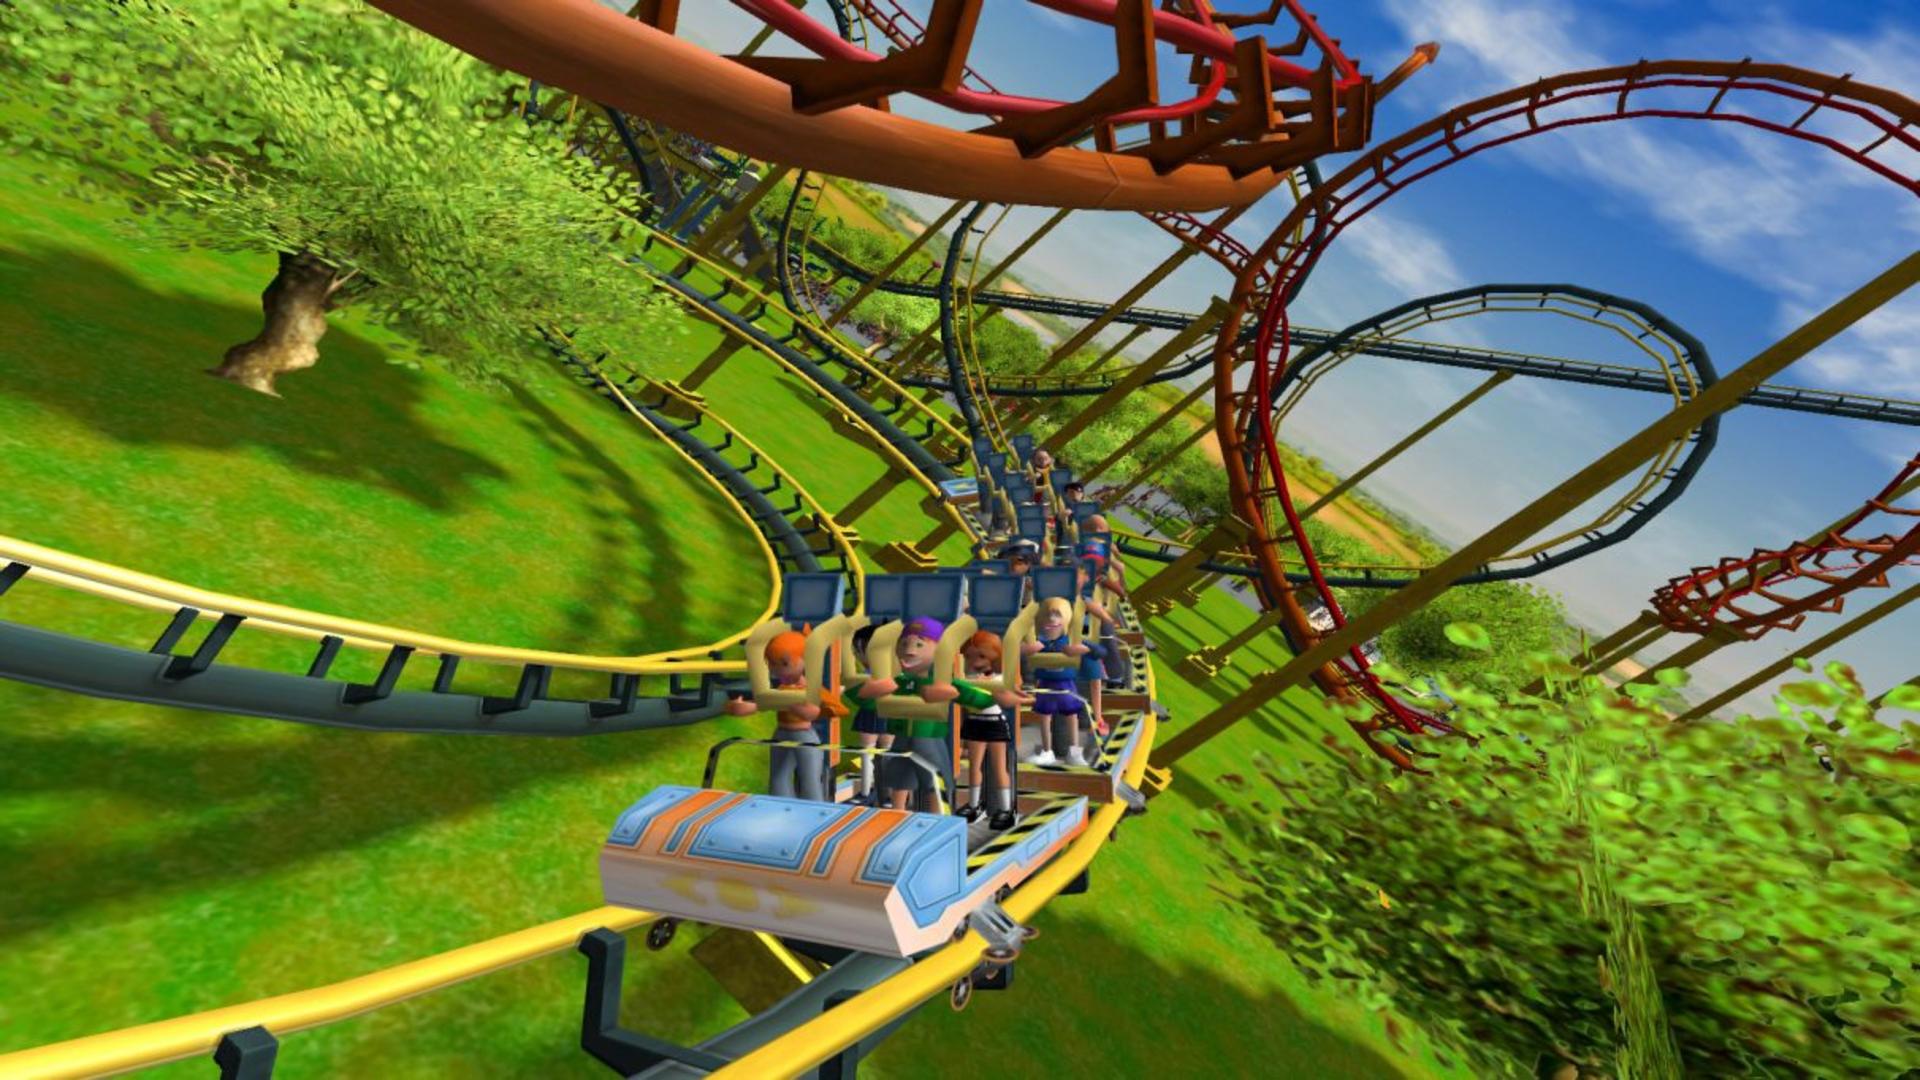 Rollercoaster Tycoon 3 returns with a Complete Edition this month. Rock Paper Shotgun